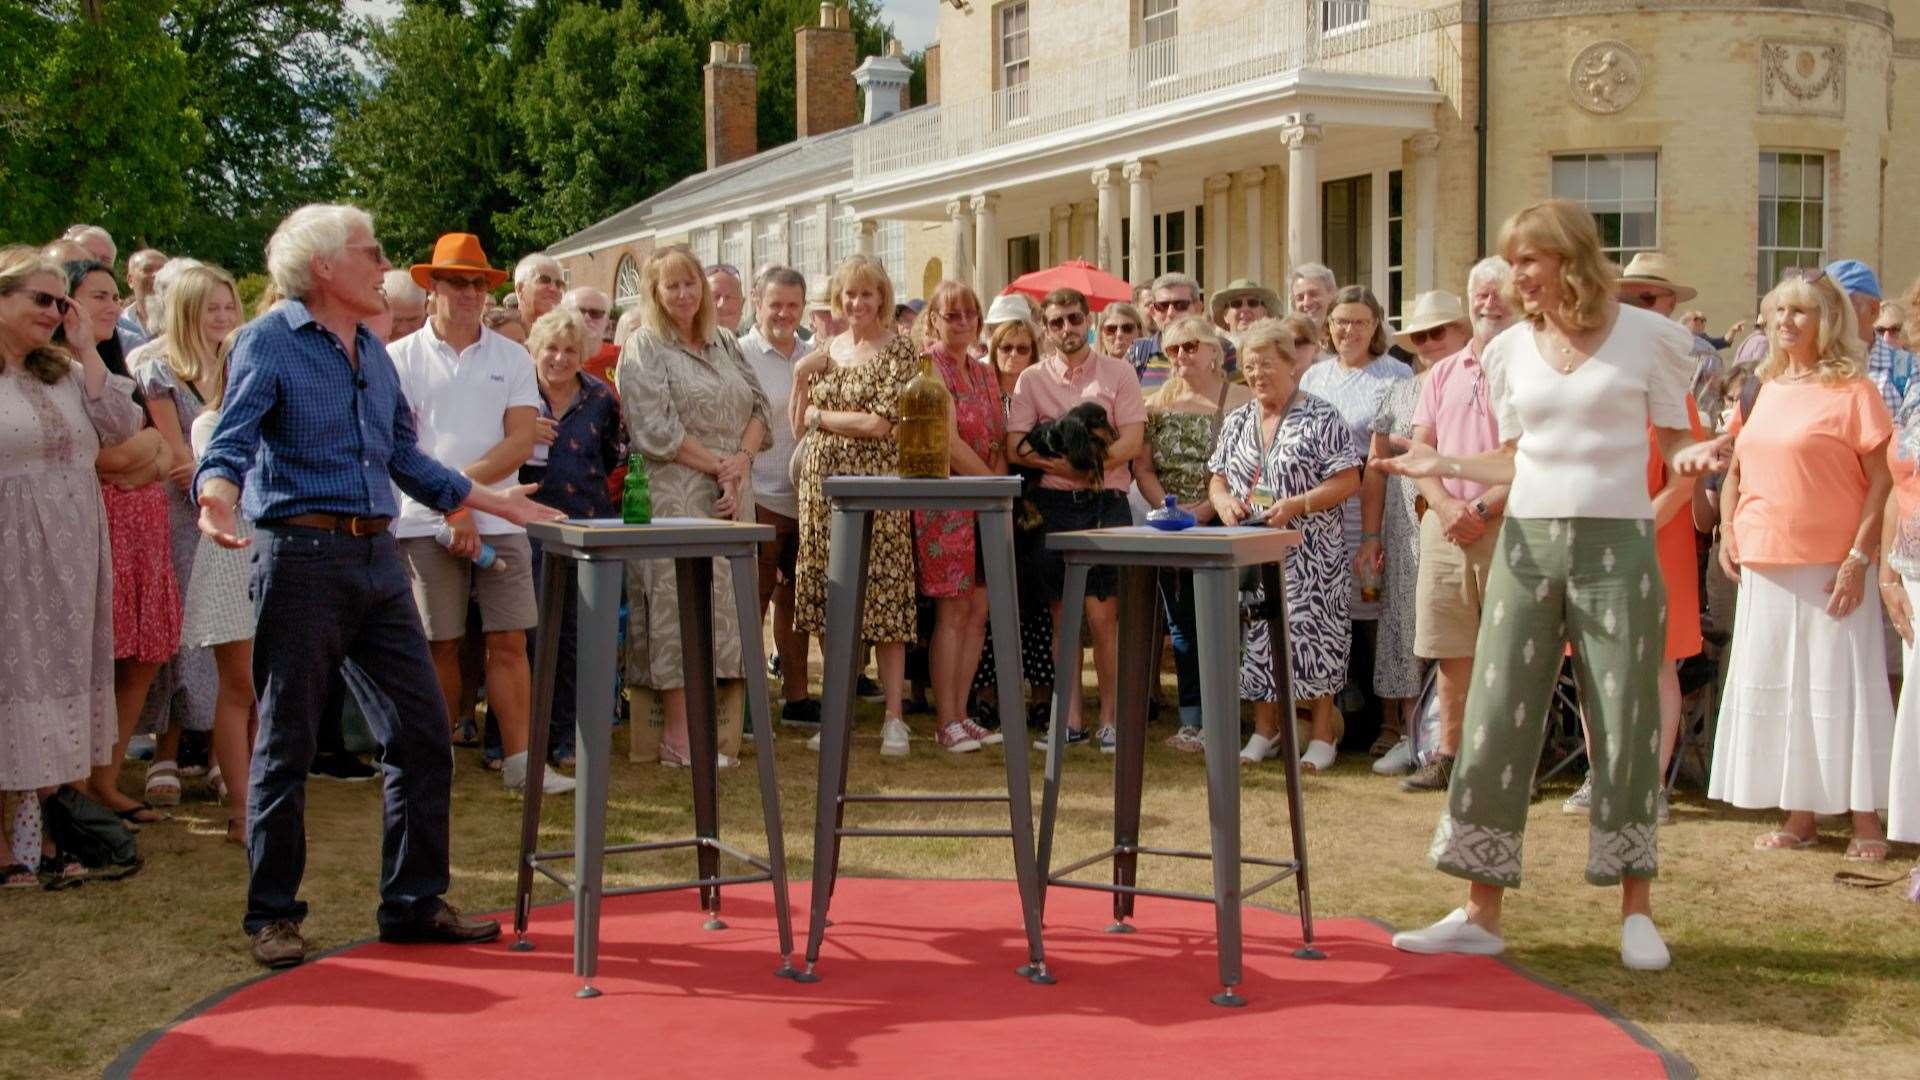 Belmont House, outside Faversham, was visited by the Antiques Roadshow crew. Picture: Antiques Roadshow / BBC Studios